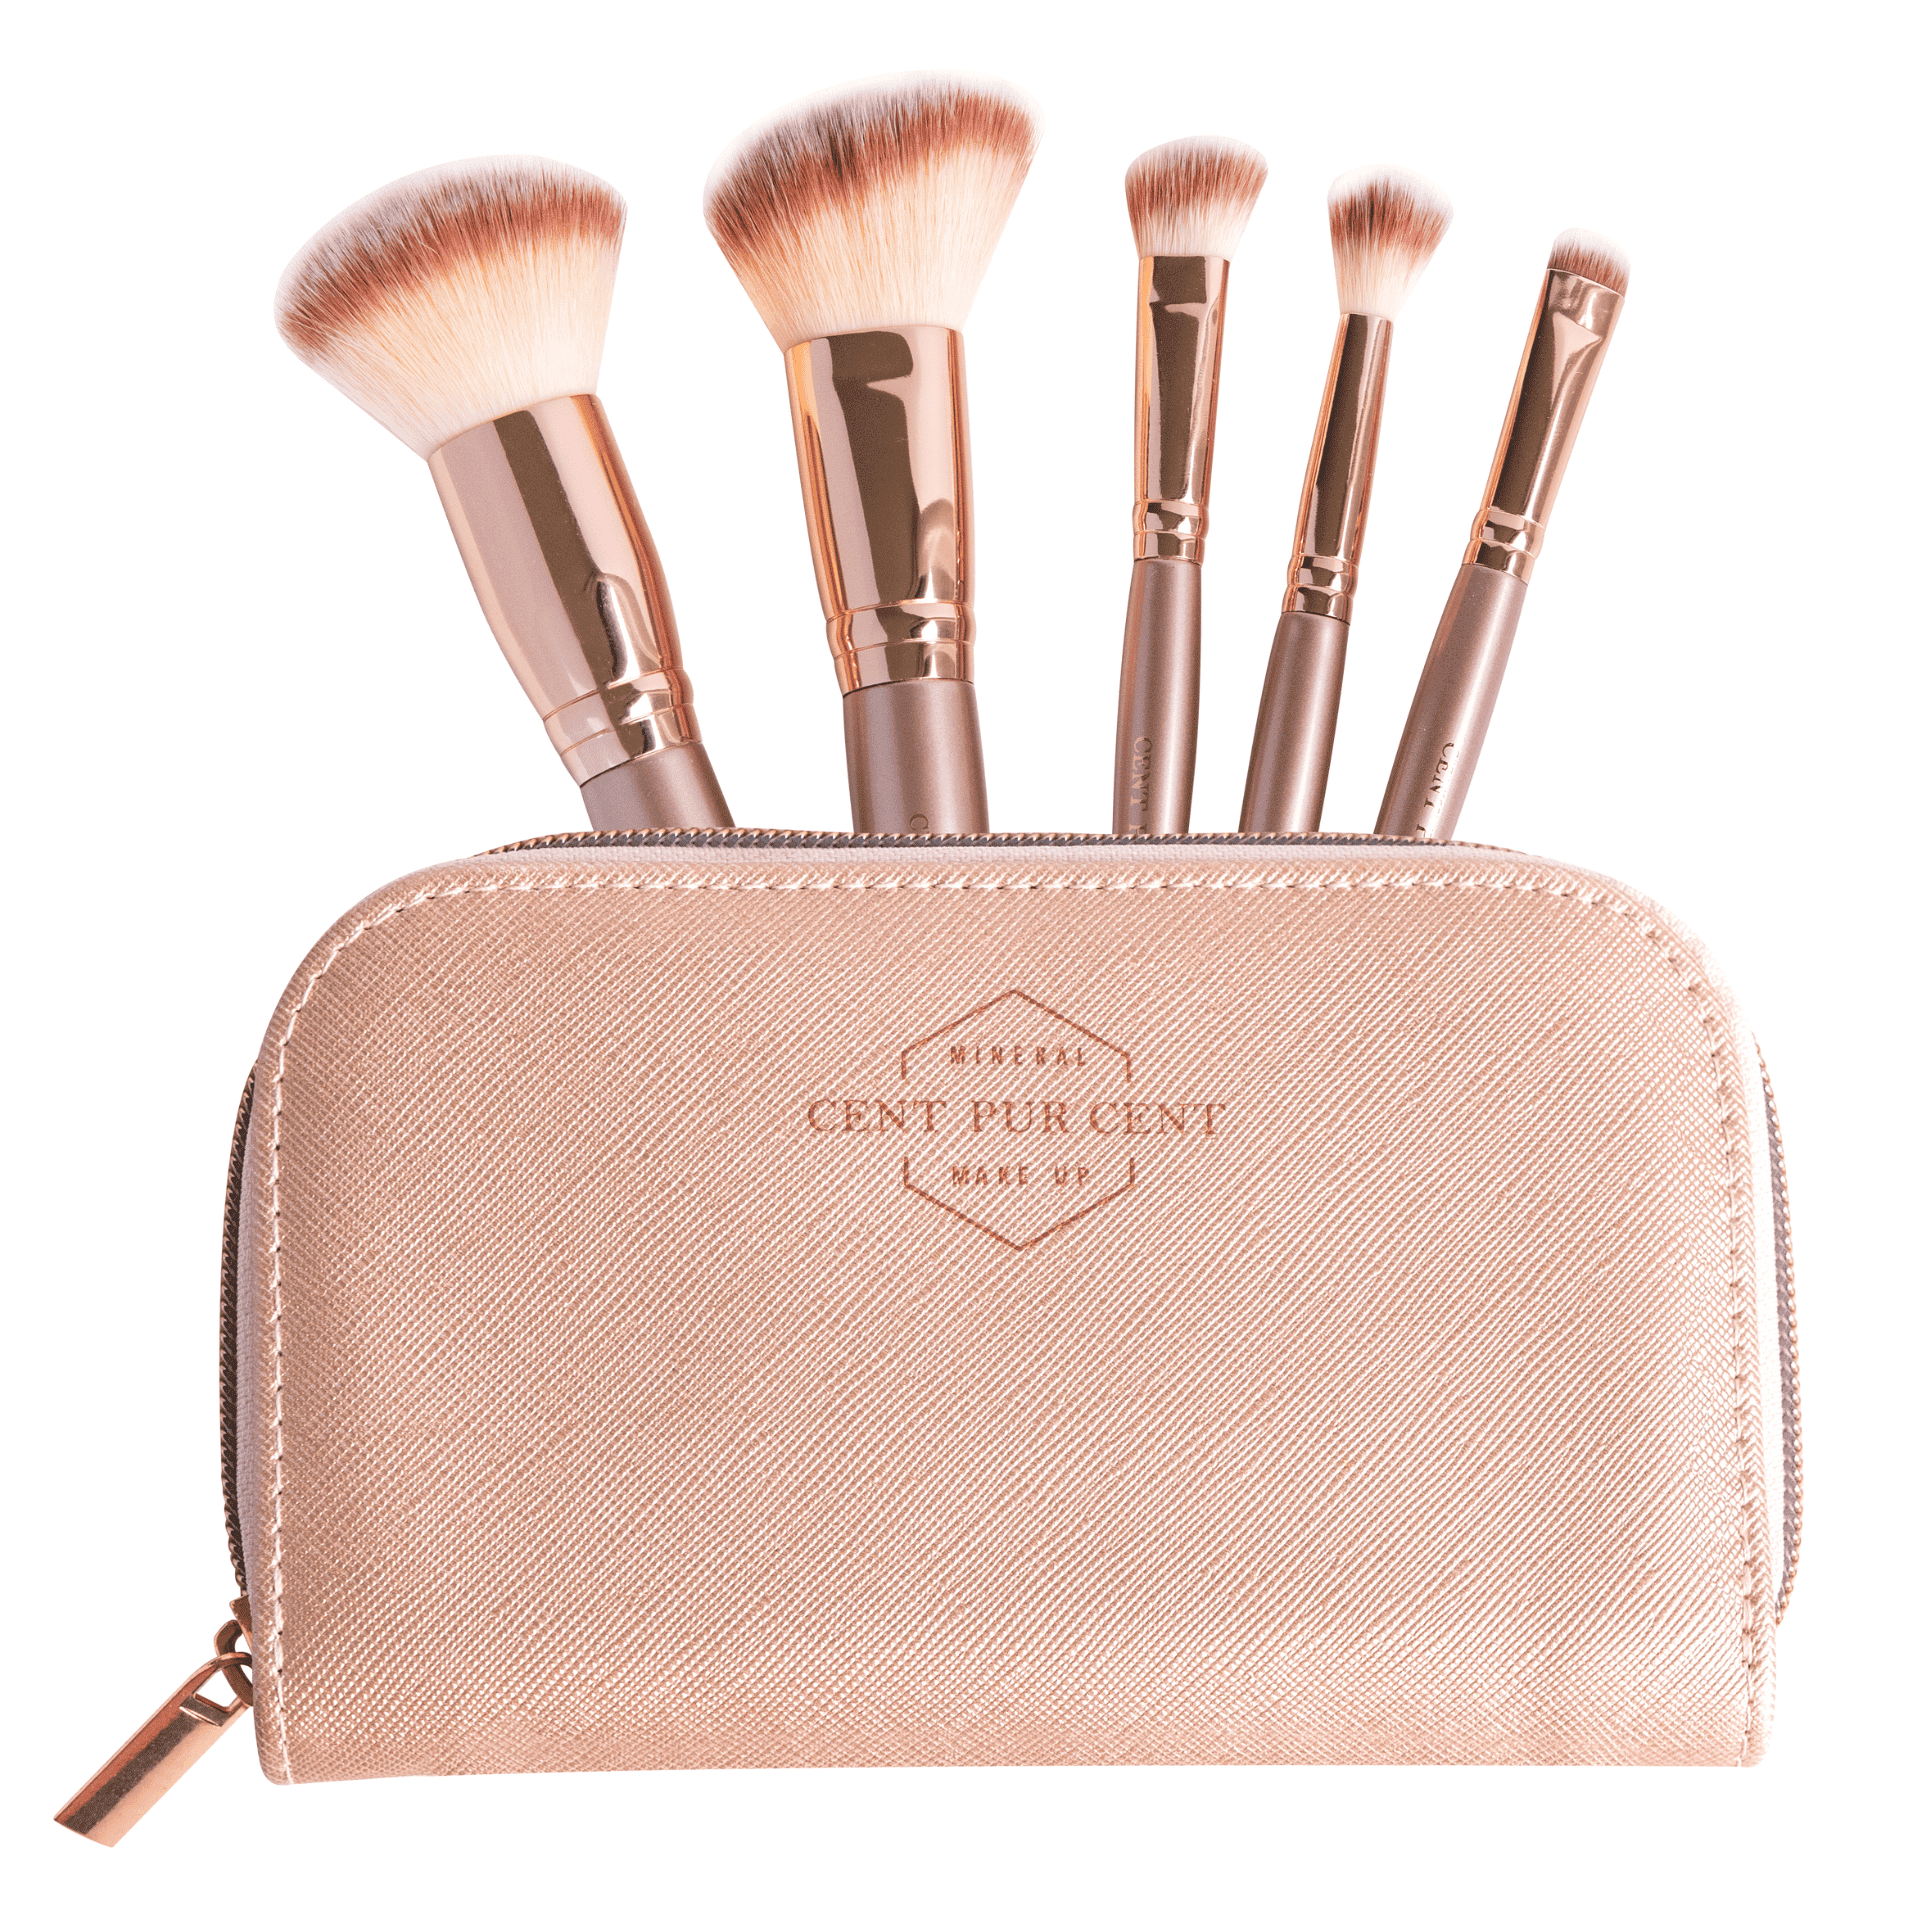 Cent Pur Cent Clutch Luxe Brush Set